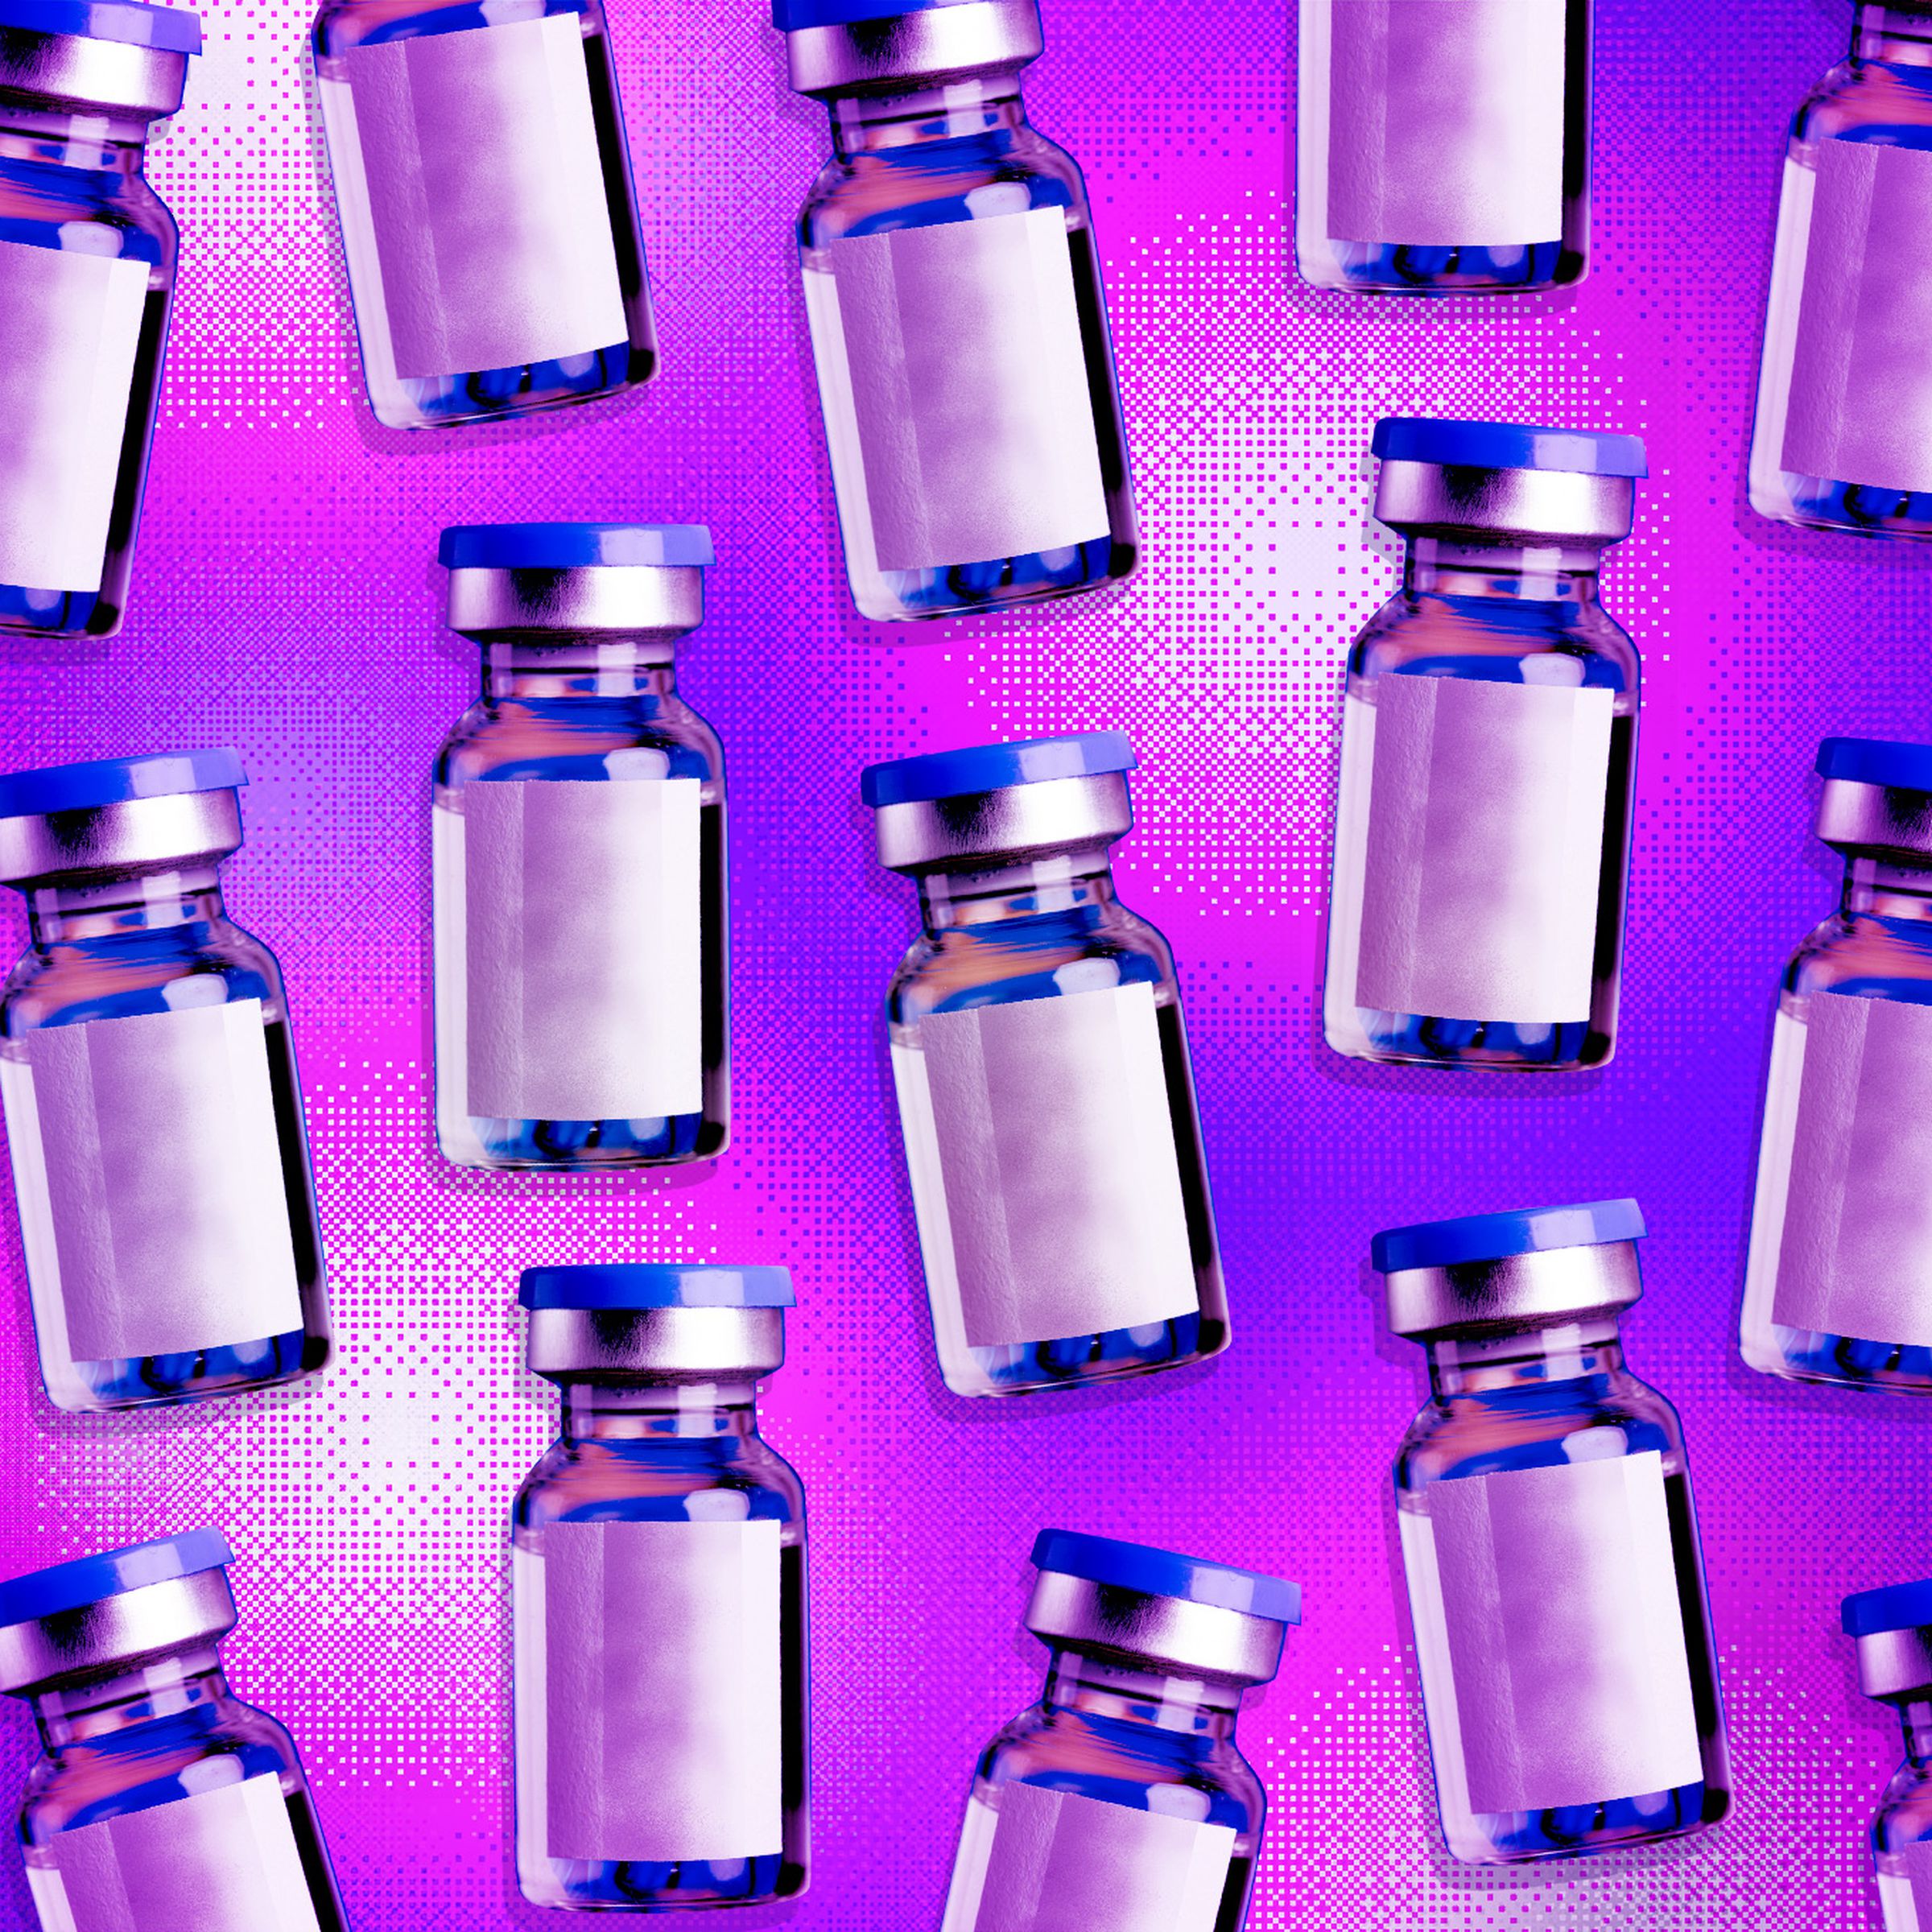 An illustration of several vaccine vials over a pink and purple background.